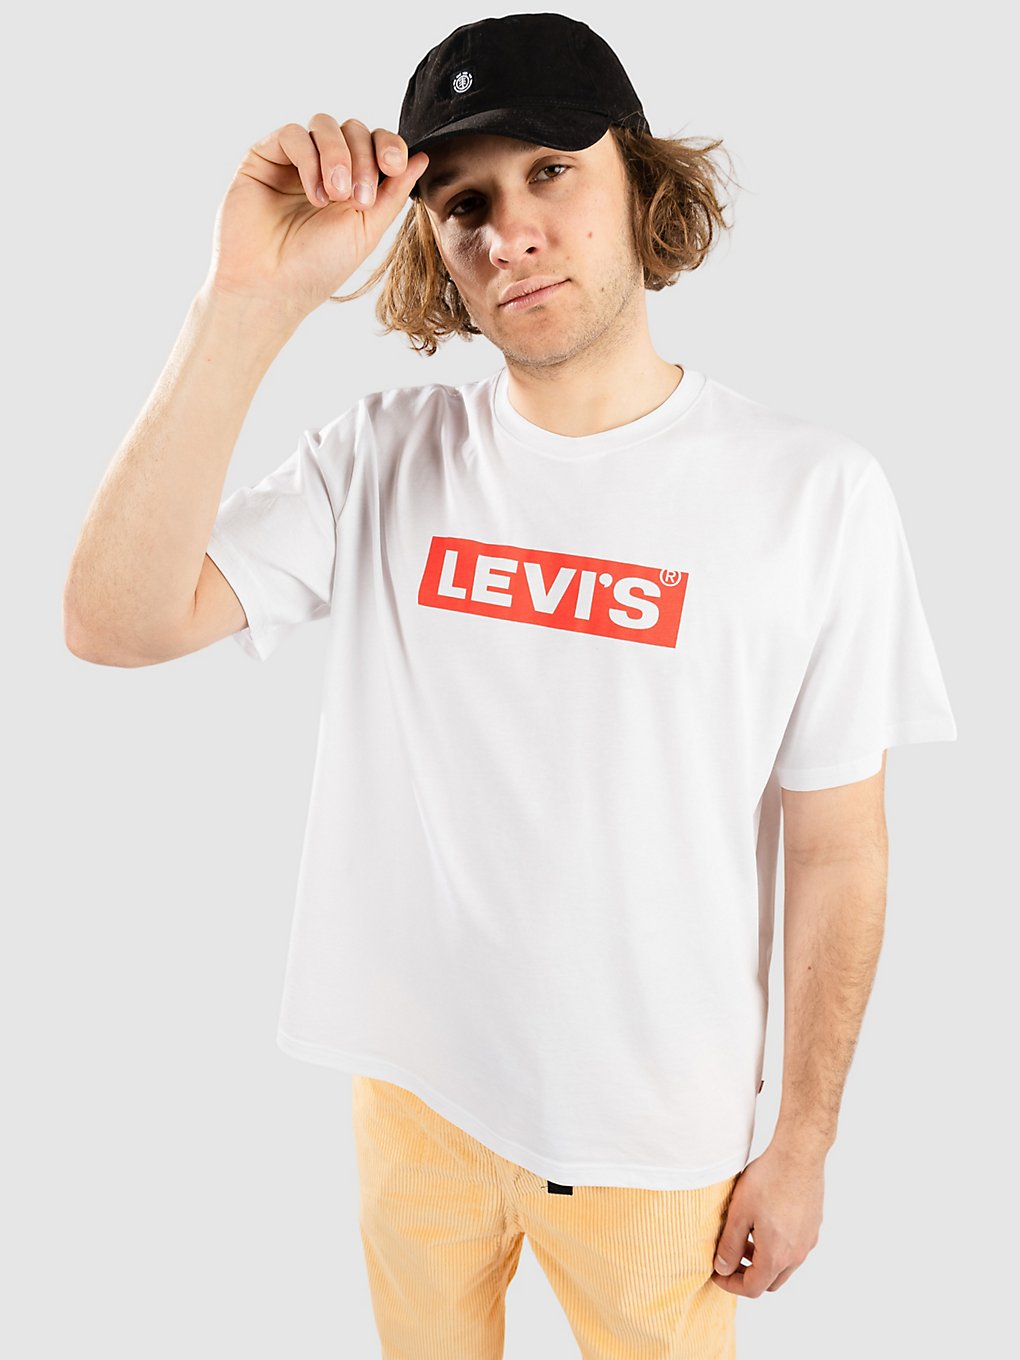 levi's relaxed fit reds t-shirt boxtab+ white+